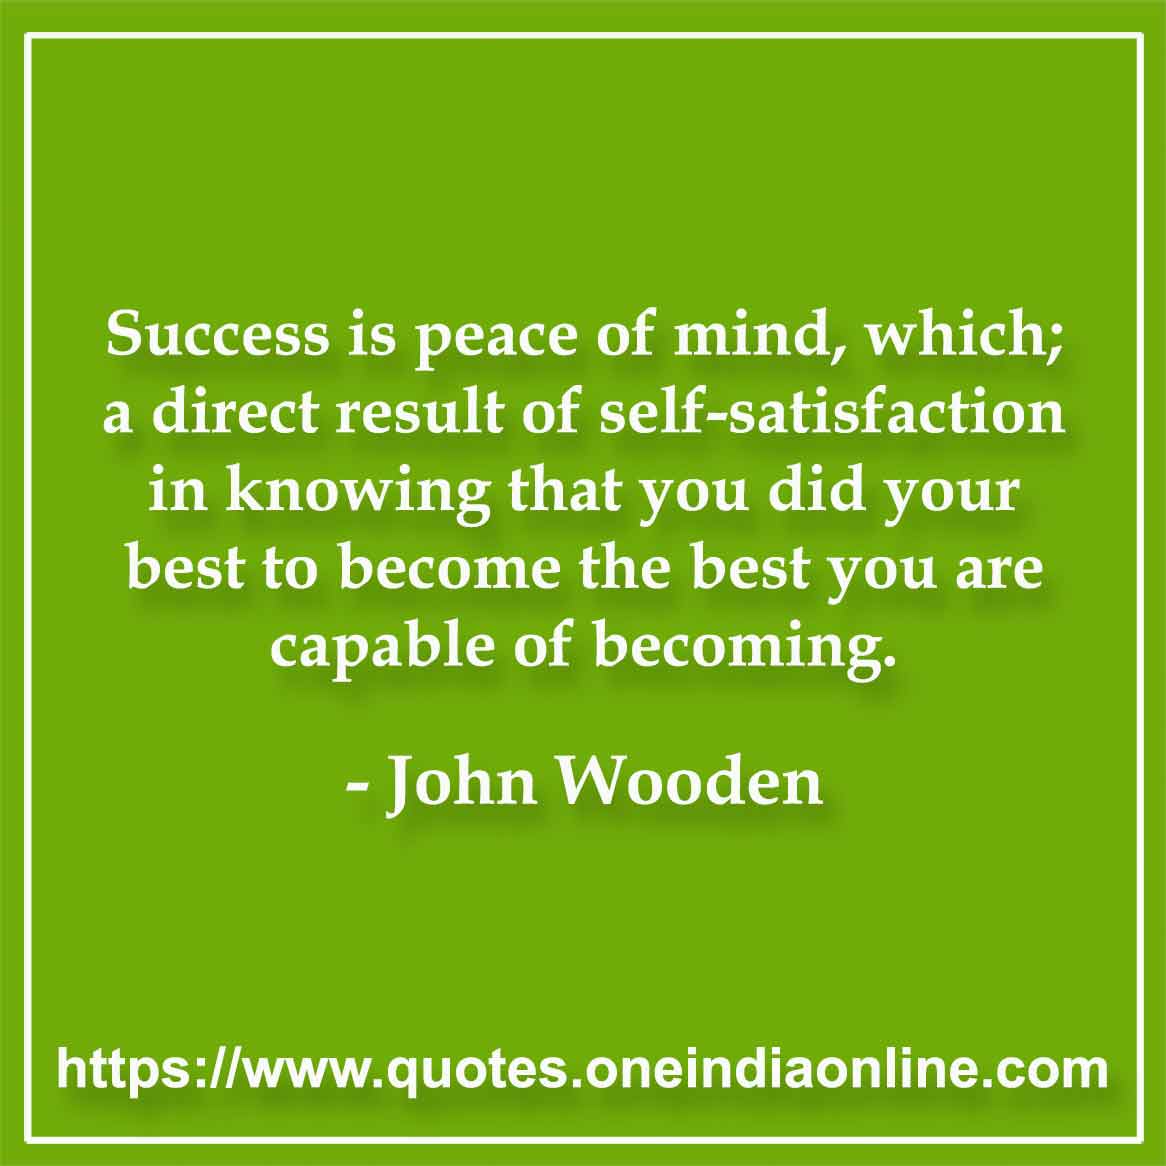 Success is peace of mind, which; a direct result of self-satisfaction in knowing that you did your best to become the best you are capable of becoming. John Wooden